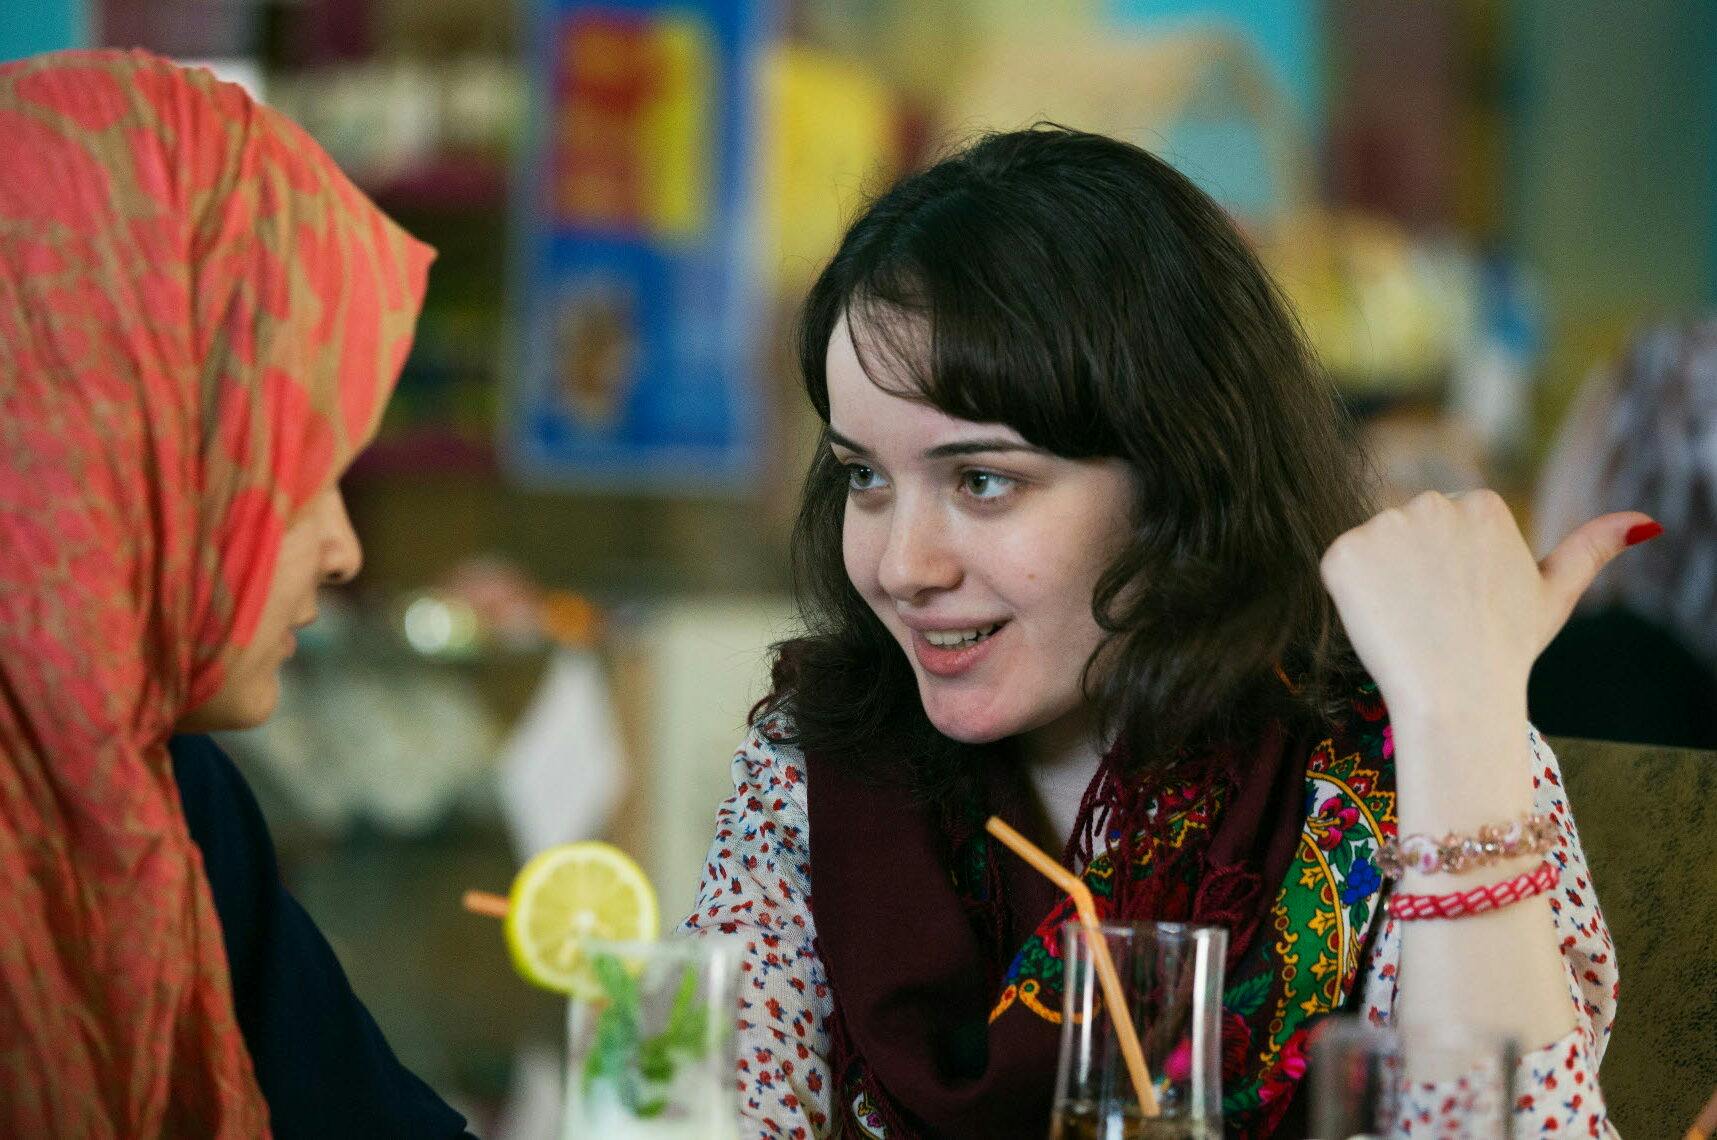 Two young women talking to each other in a cafe.